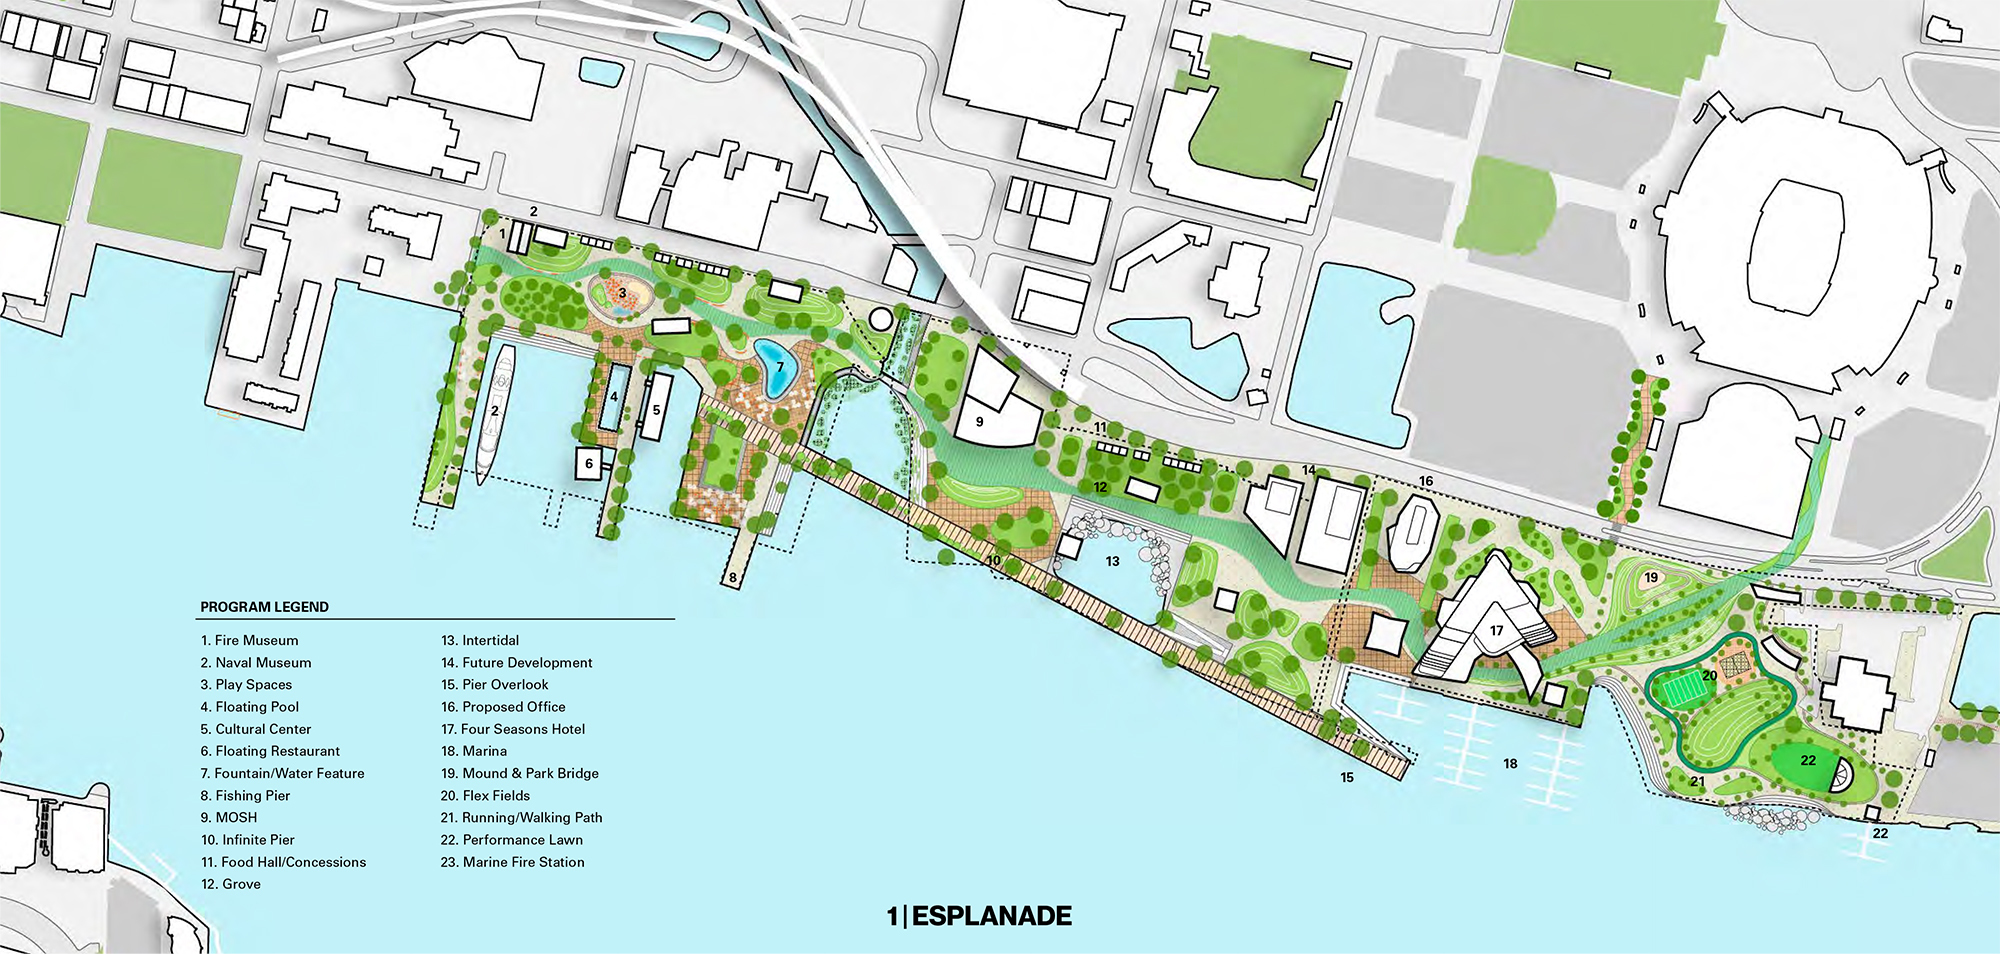 Shipyards West will sit at the west end of the Shipyards redevelopment. This map was part of a duPont Fund connectivity study.